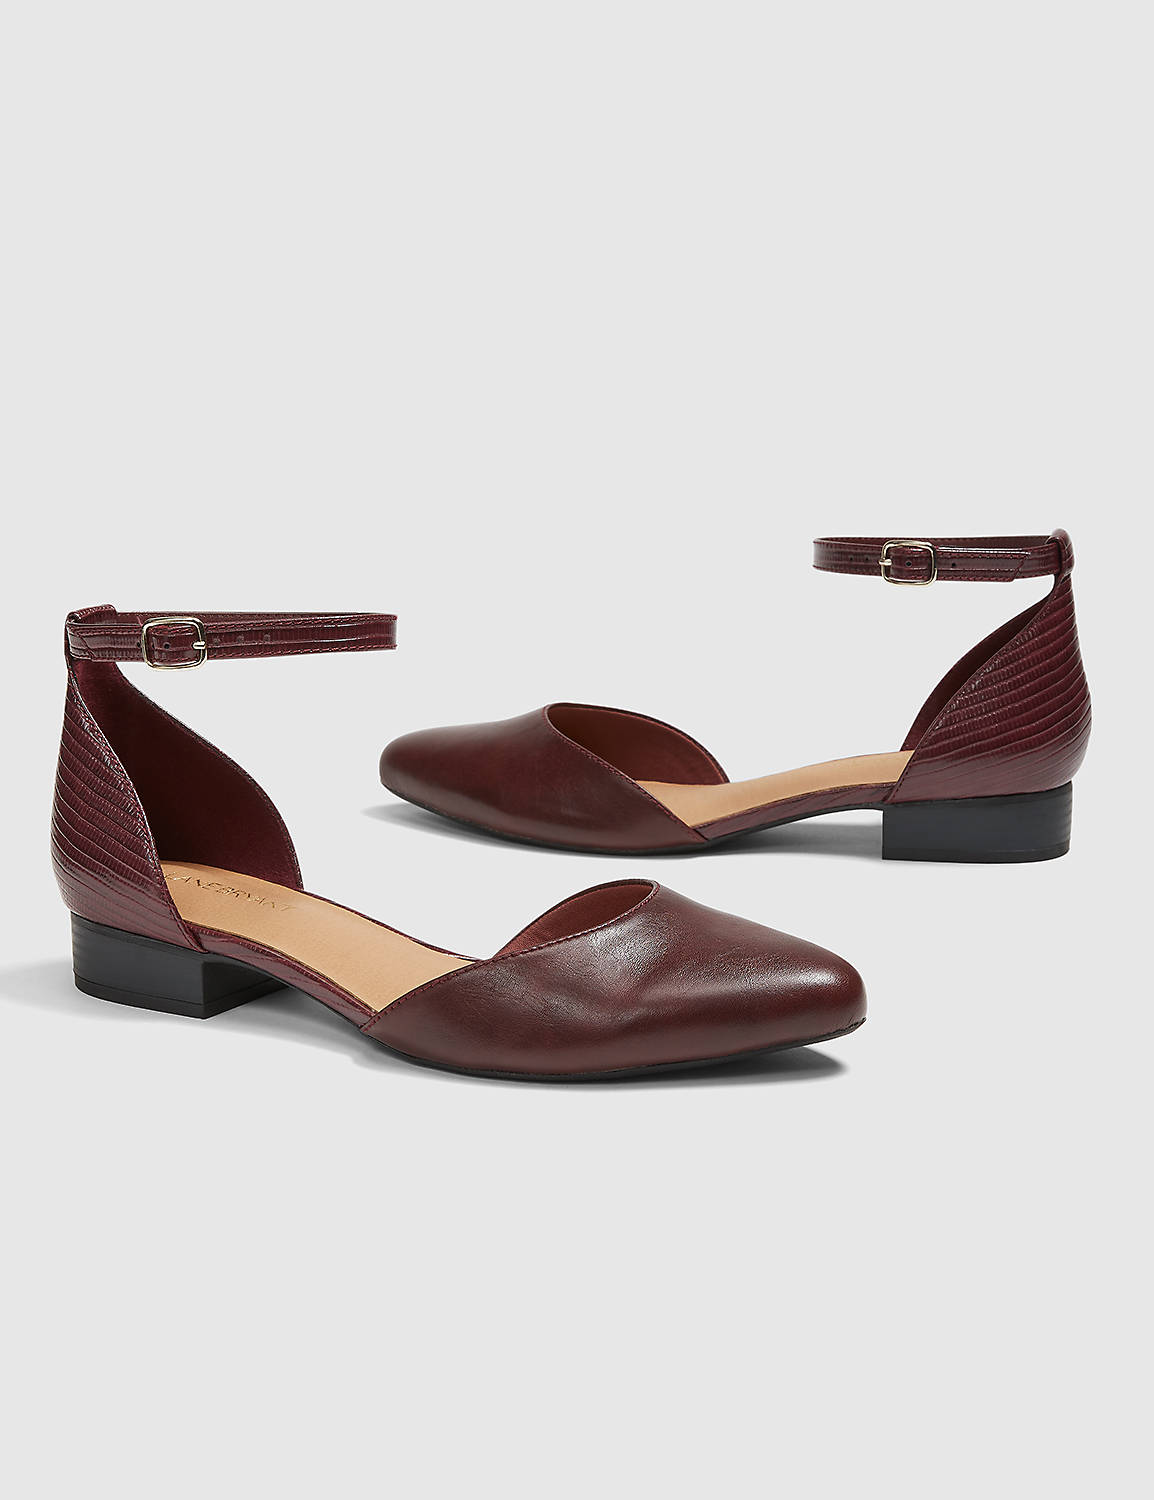 Smooth 2PC Flat with Ankle Strap - Croco:PANTONE Winetasting:9W Product Image 1